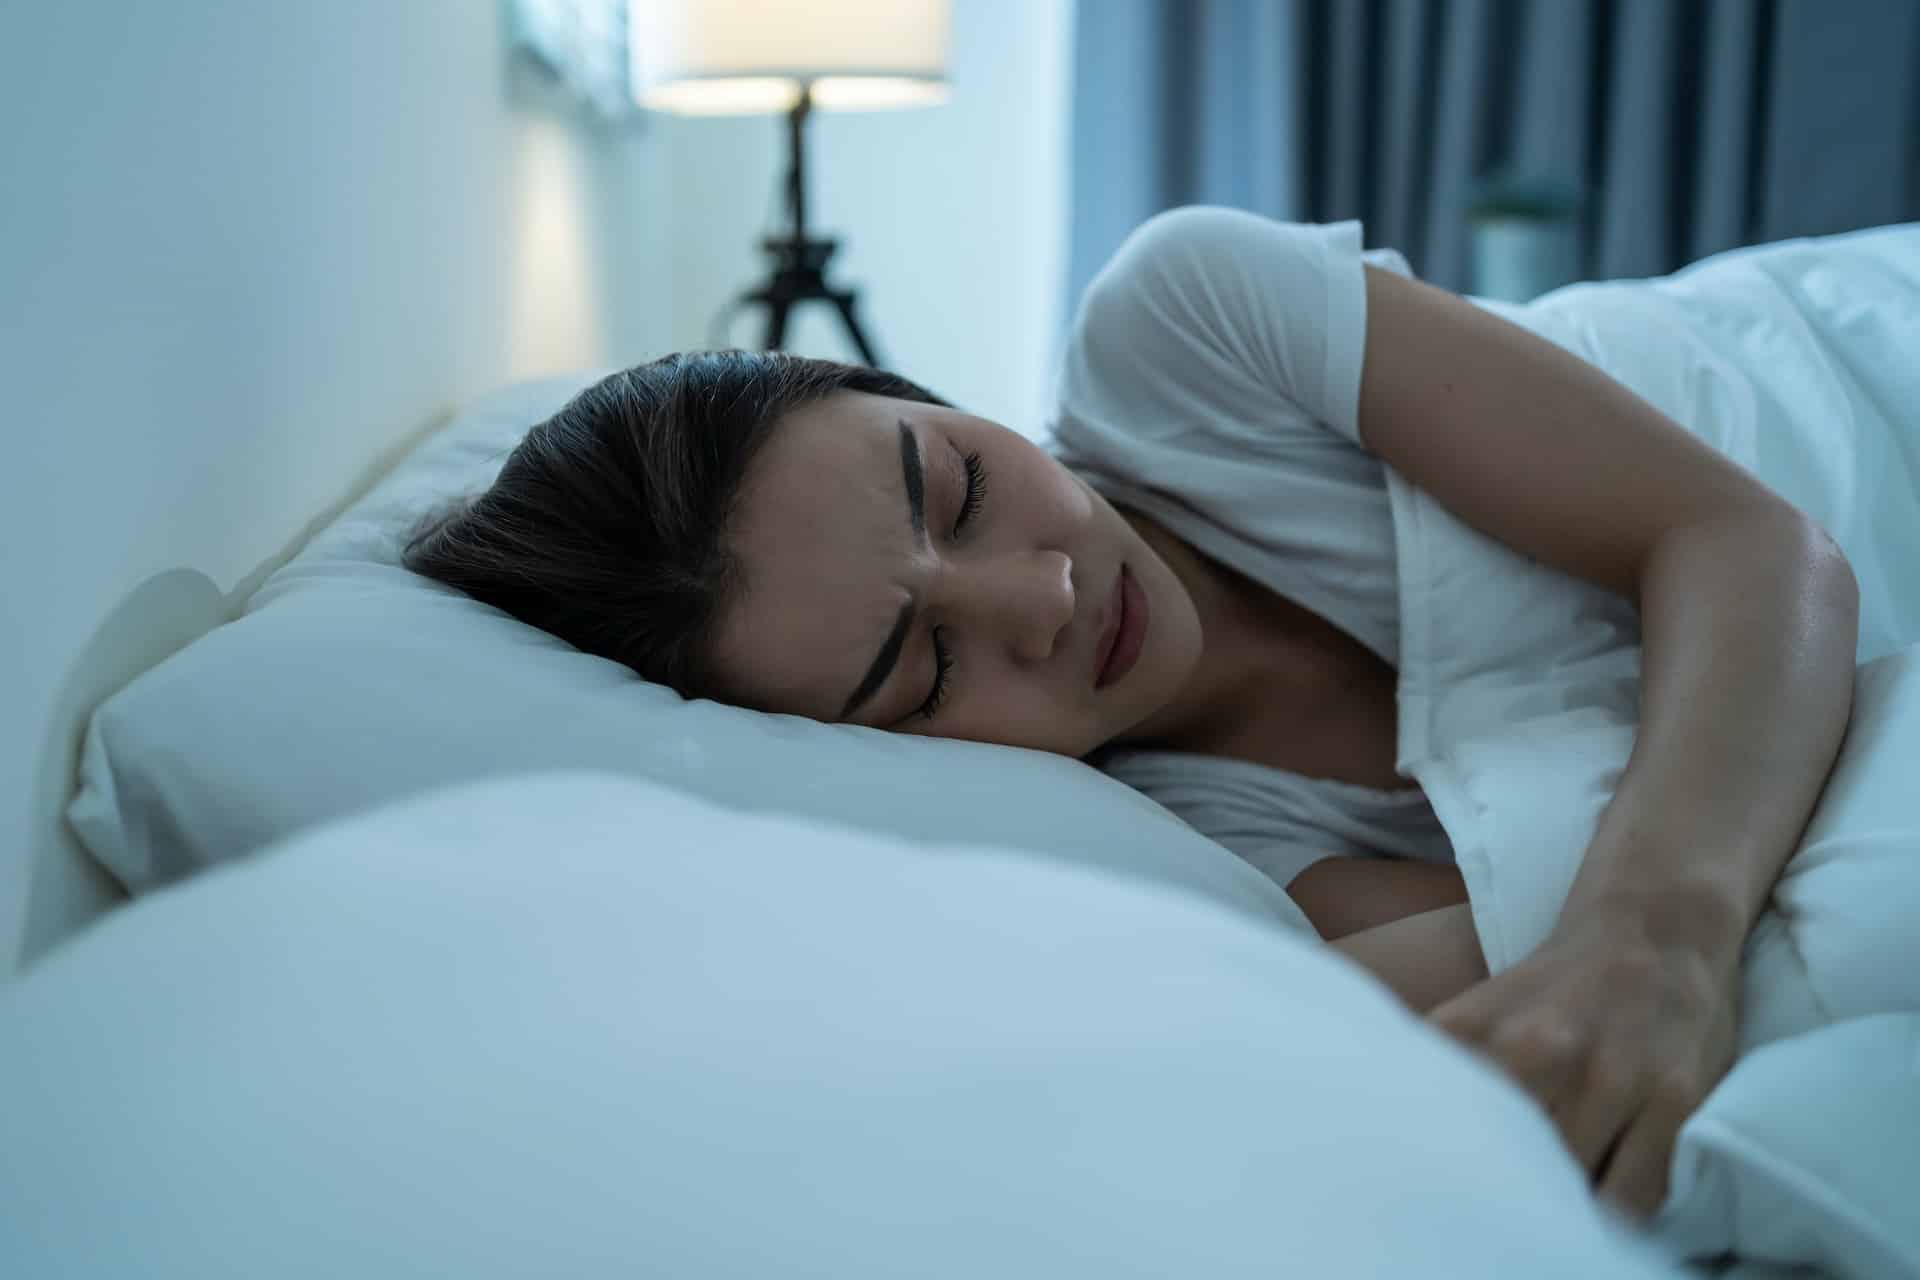 Woman, looking tired and stressed out lying on bed asleep.